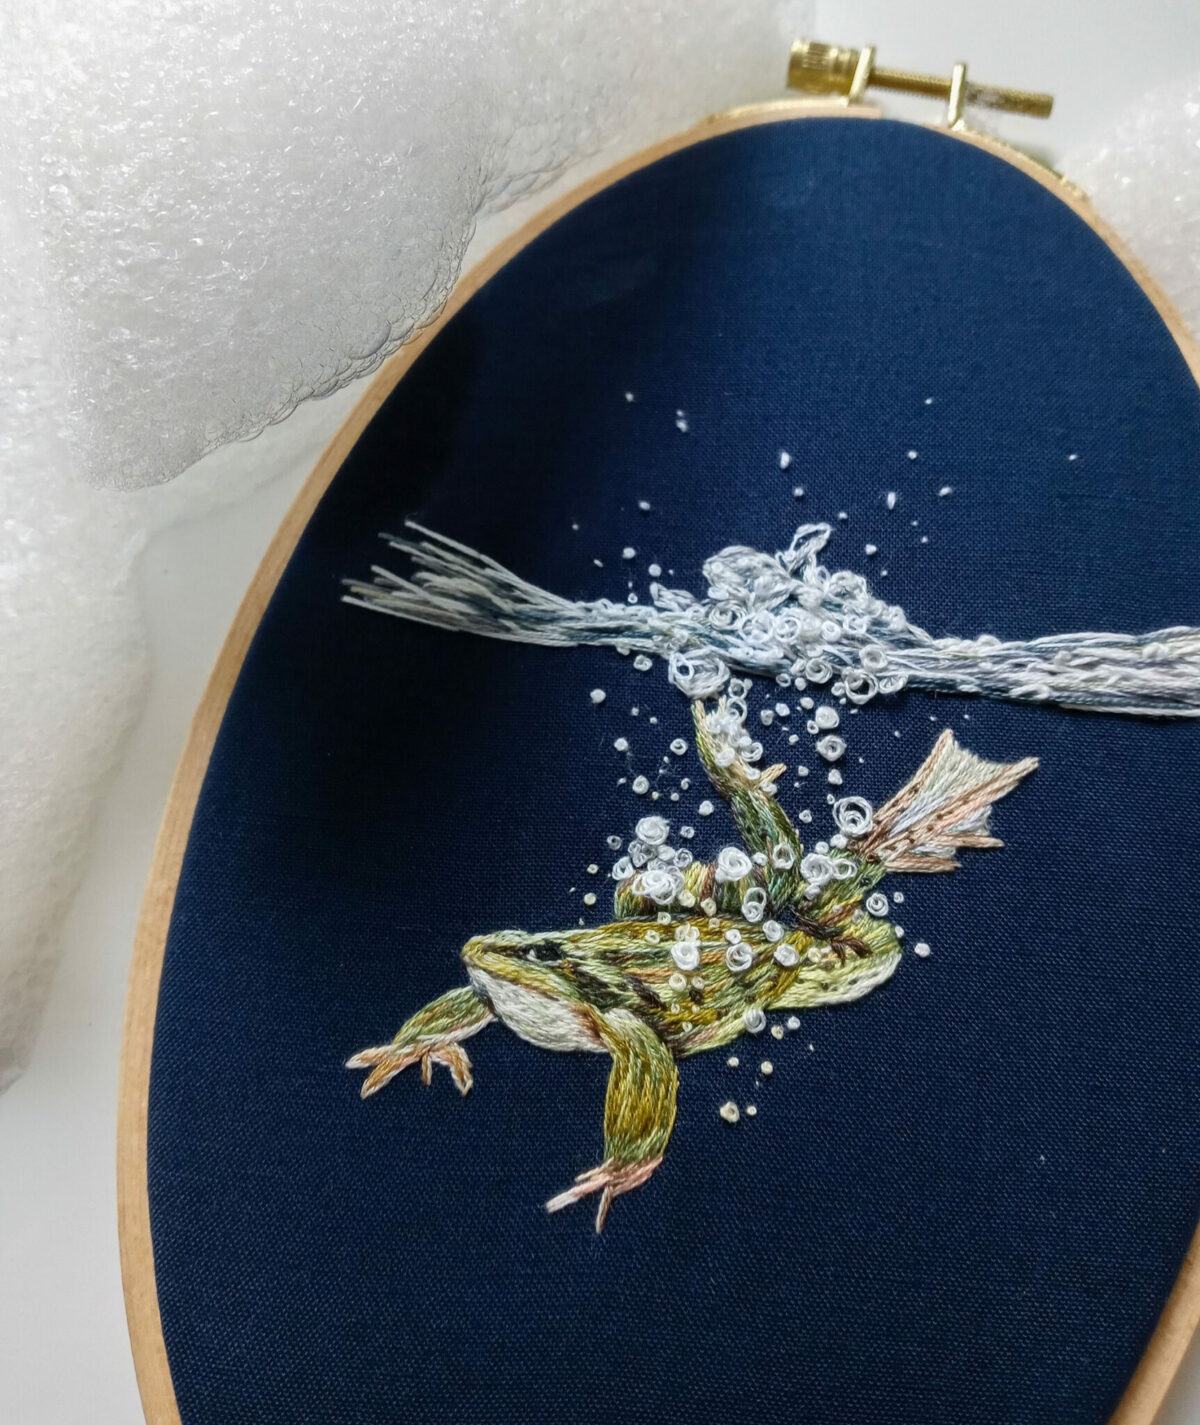 Gorgeous Embroideries Of Animals Plunging Into The Waters By Megan Zaniewski 12